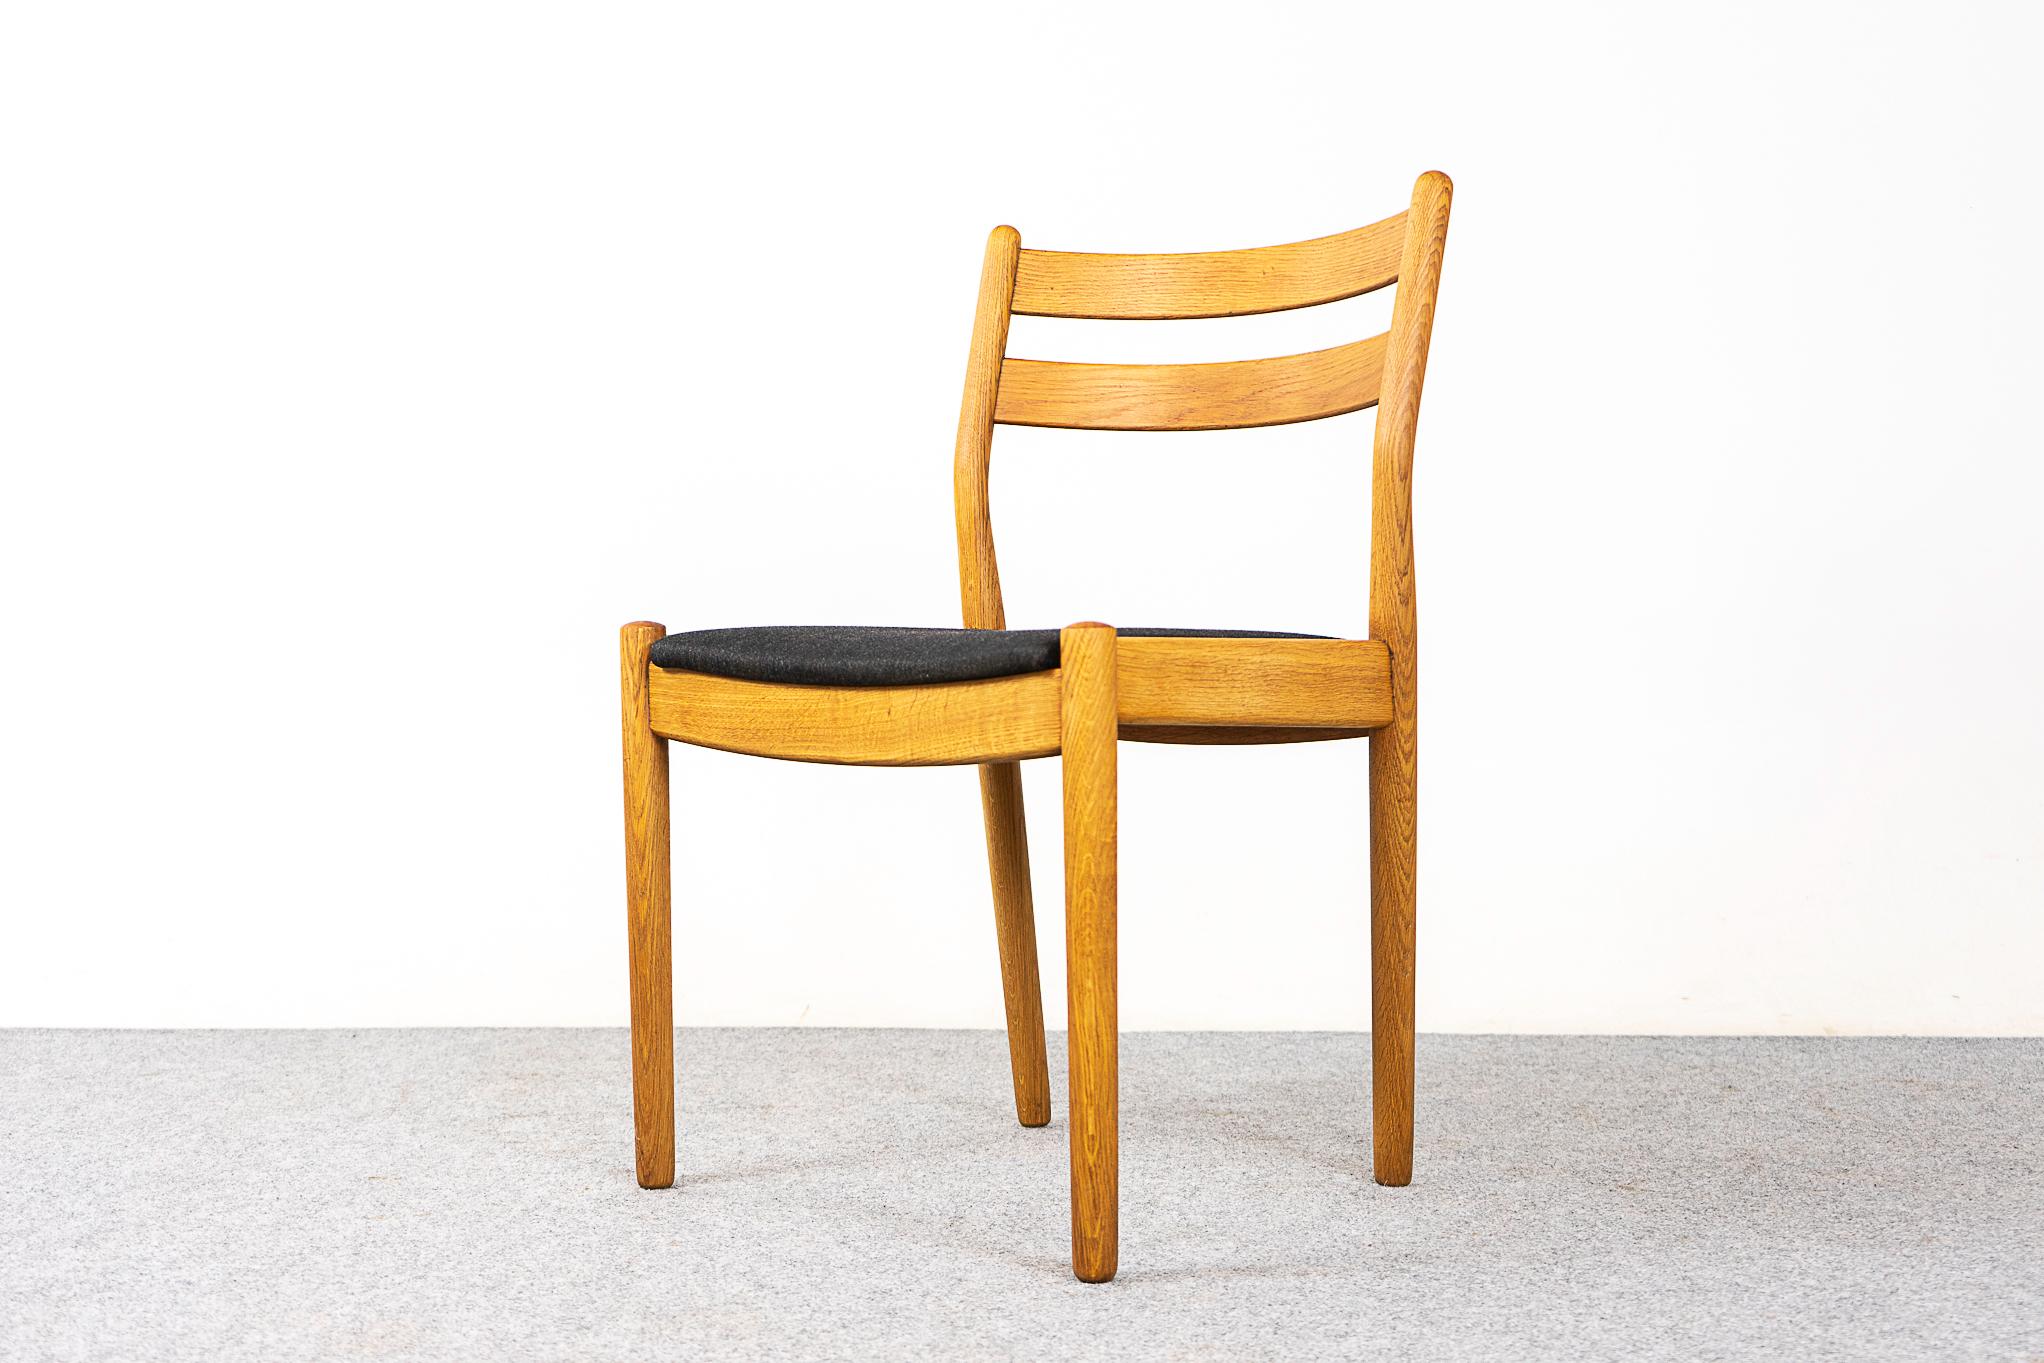 Oak midcentury chairs by Poul Volther for F.D.B.Mobler, circa 1960s. Elegant, yet robust frame. Beautifully curved backrests and generous seat provide support and comfort. Original fabric with minor wear. Removable seat pad makes reupholstering a